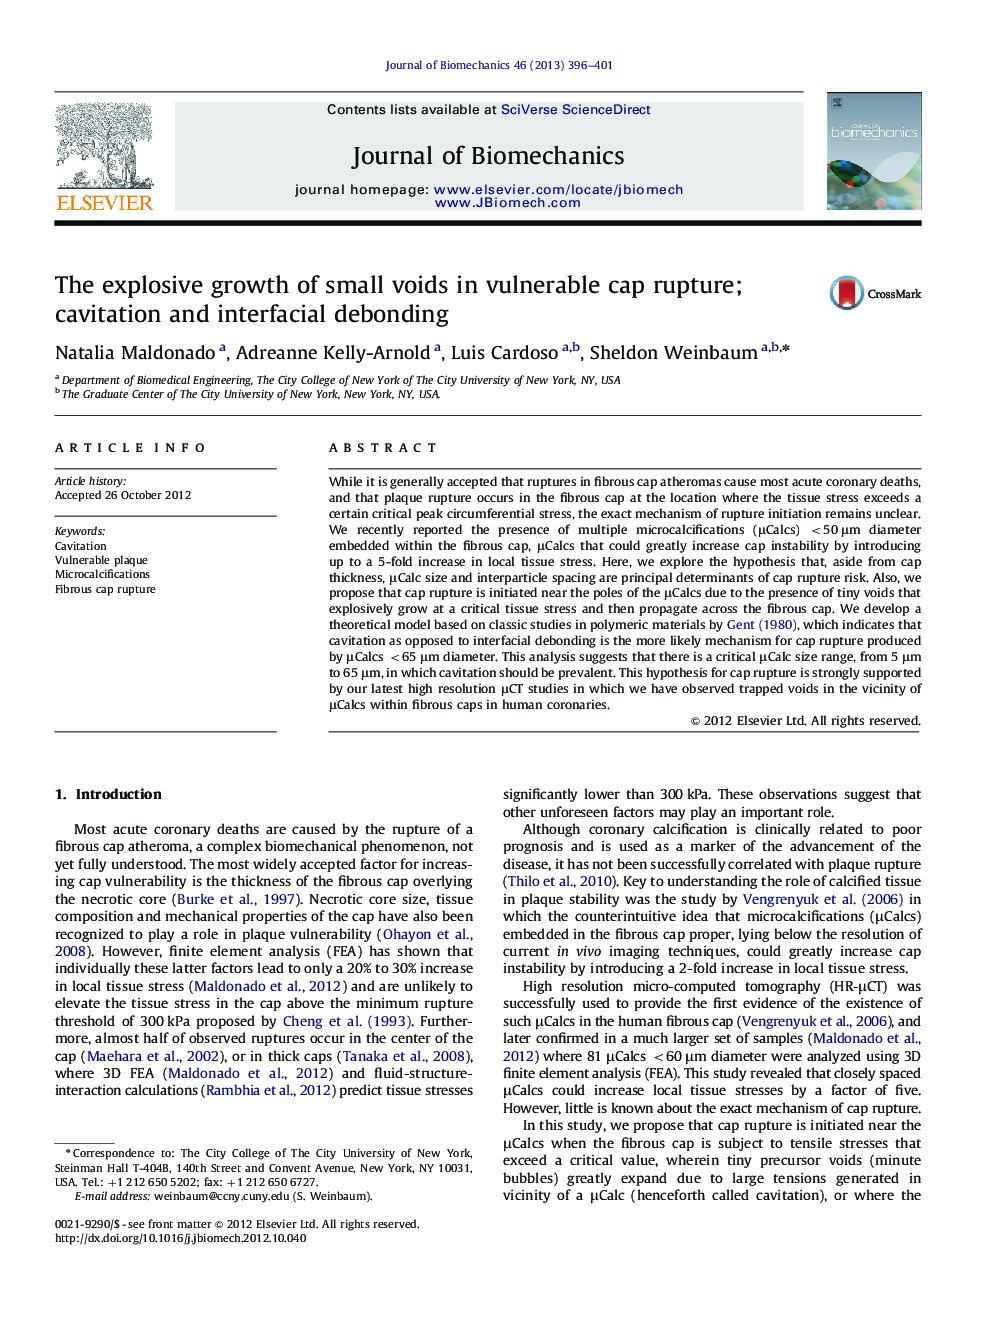 The explosive growth of small voids in vulnerable cap rupture; cavitation and interfacial debonding